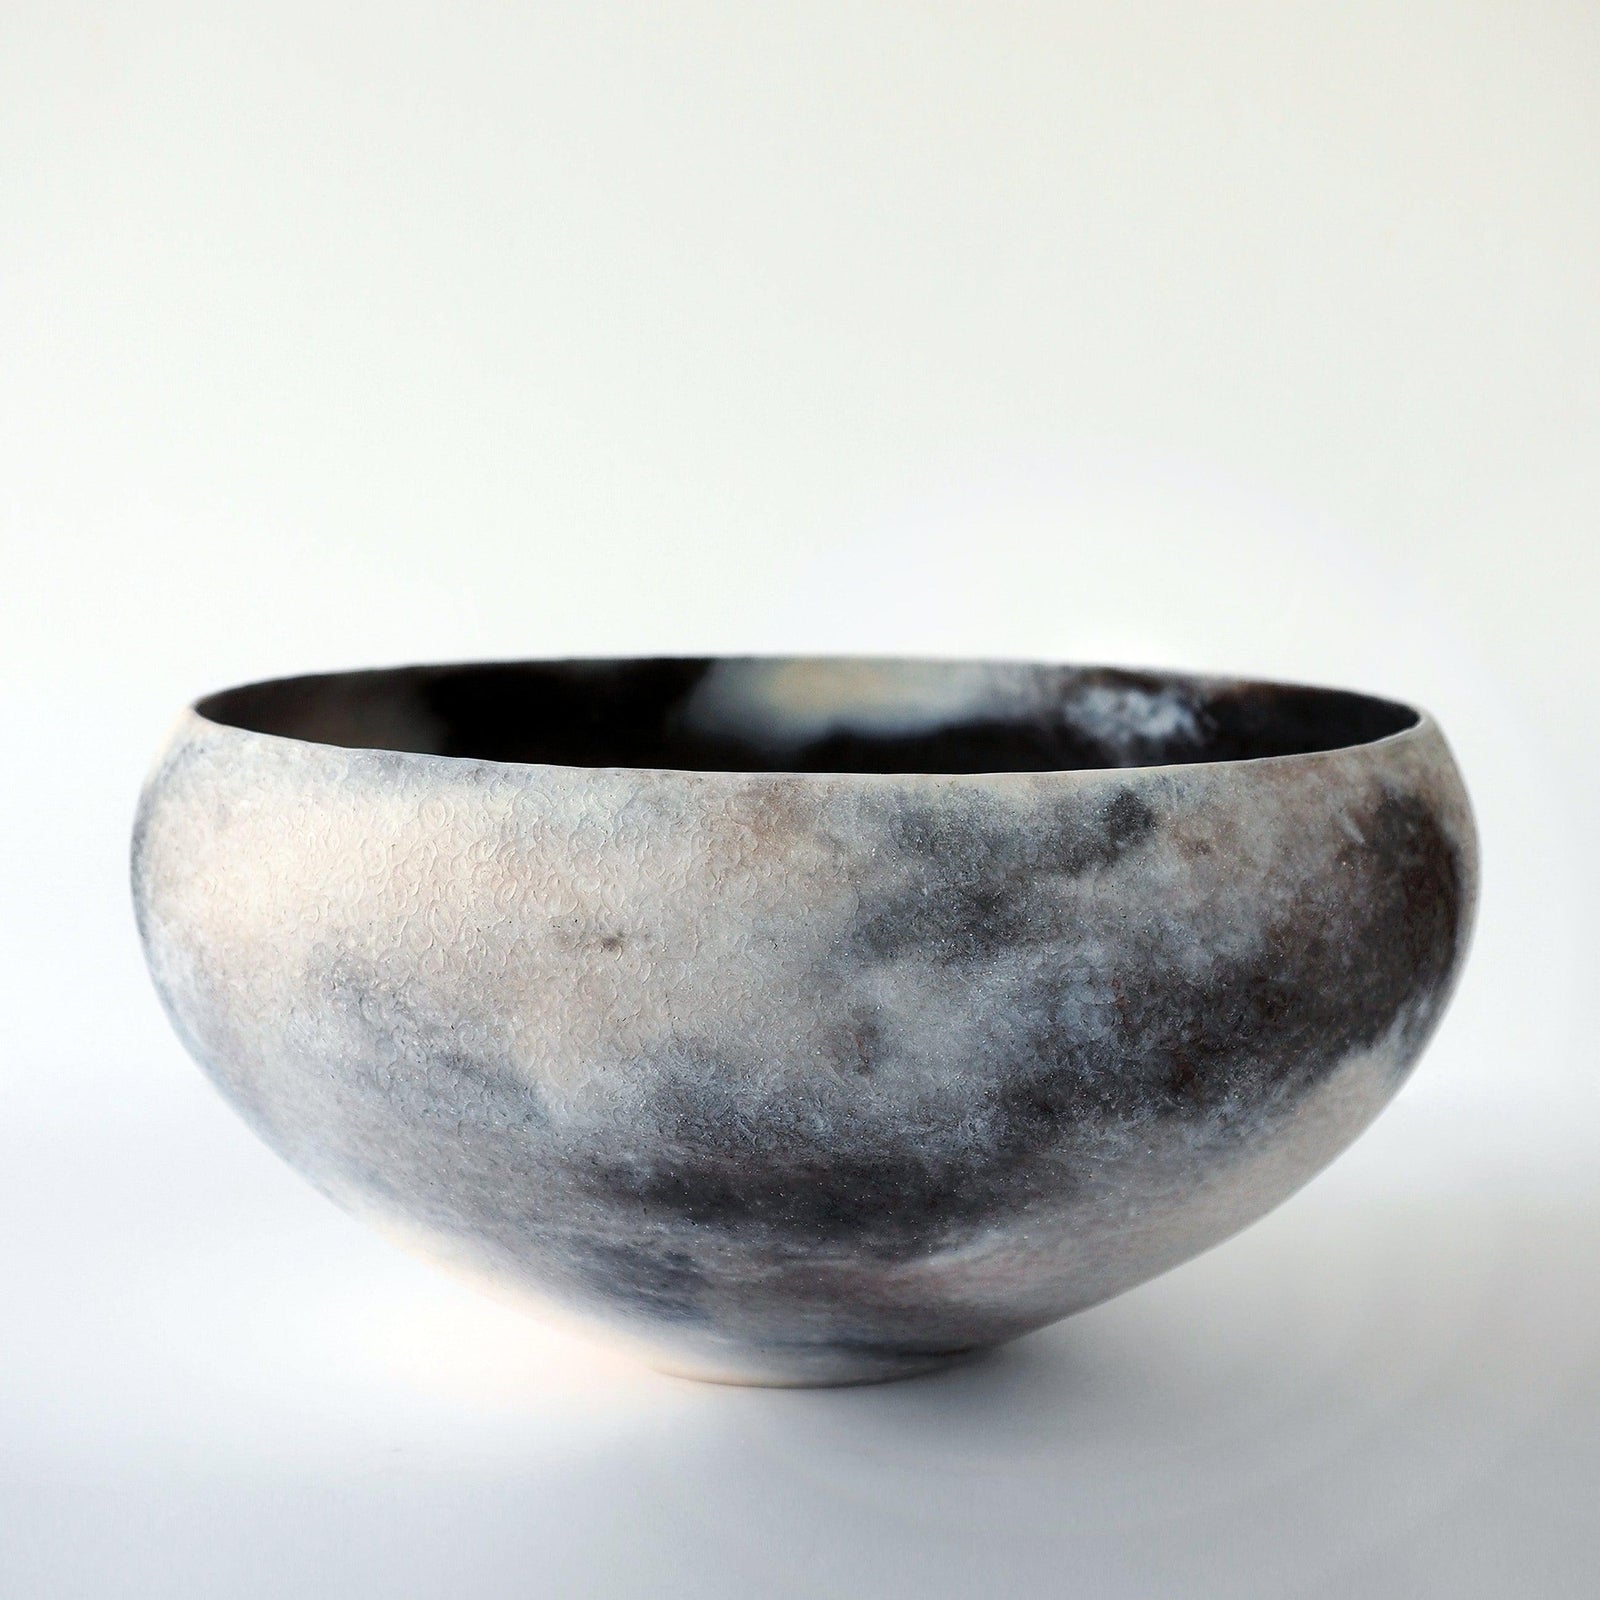 'BJ16 Large Bowl' by Bridget Johnson ceramics available at Padstow Gallery, Cornwall